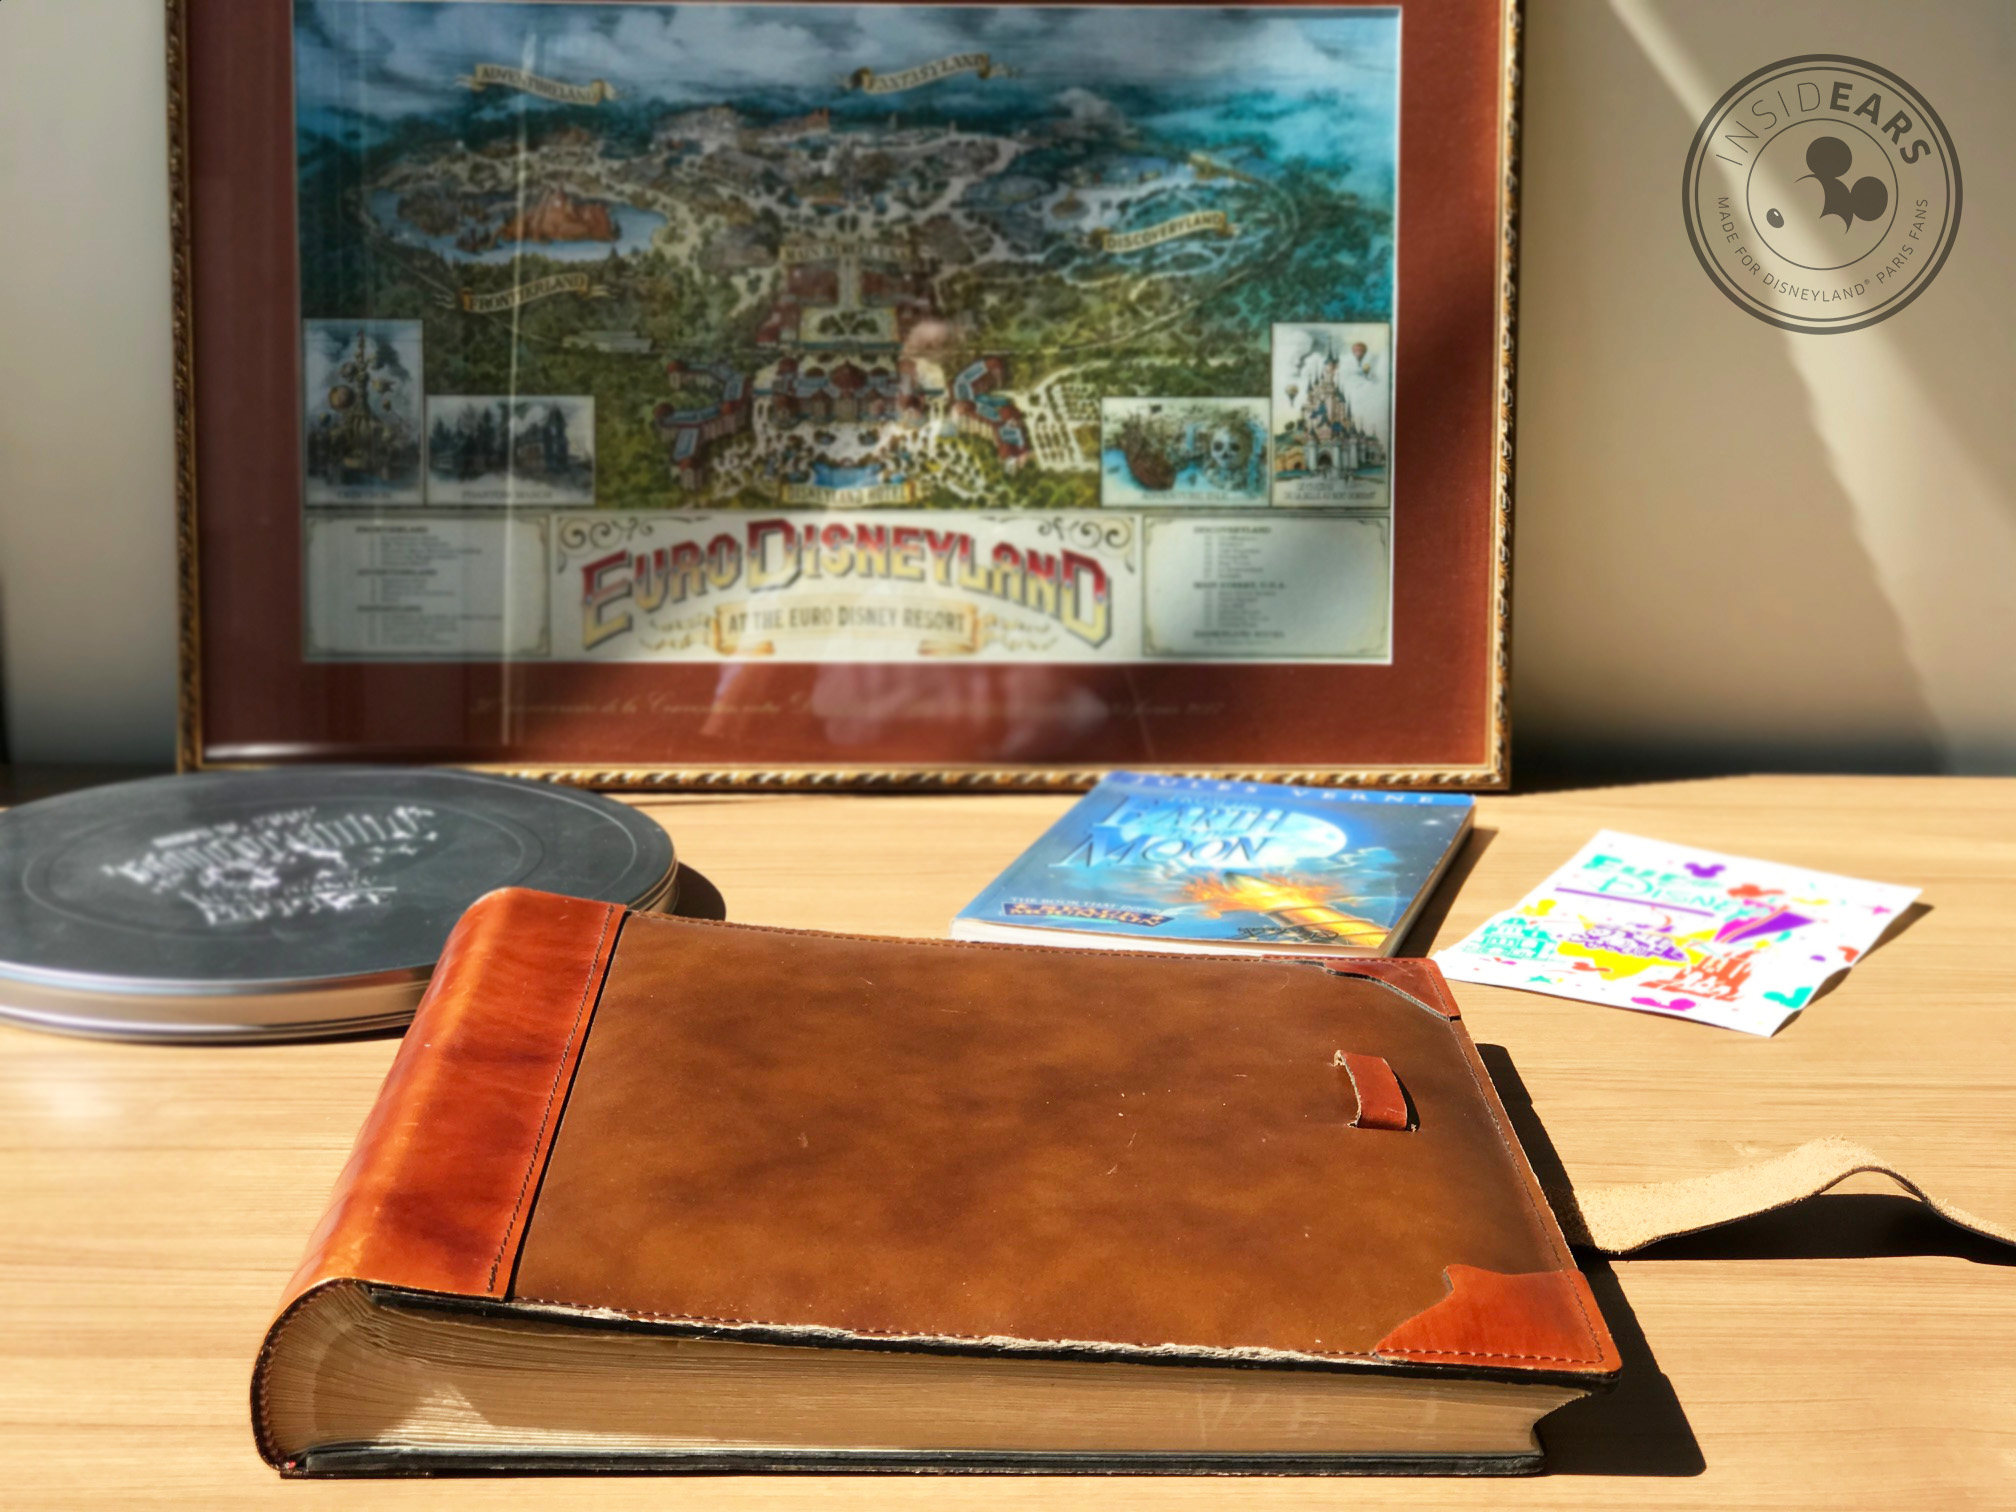 Disneyland Paris Archives: First Guestbook - Travel to the Magic